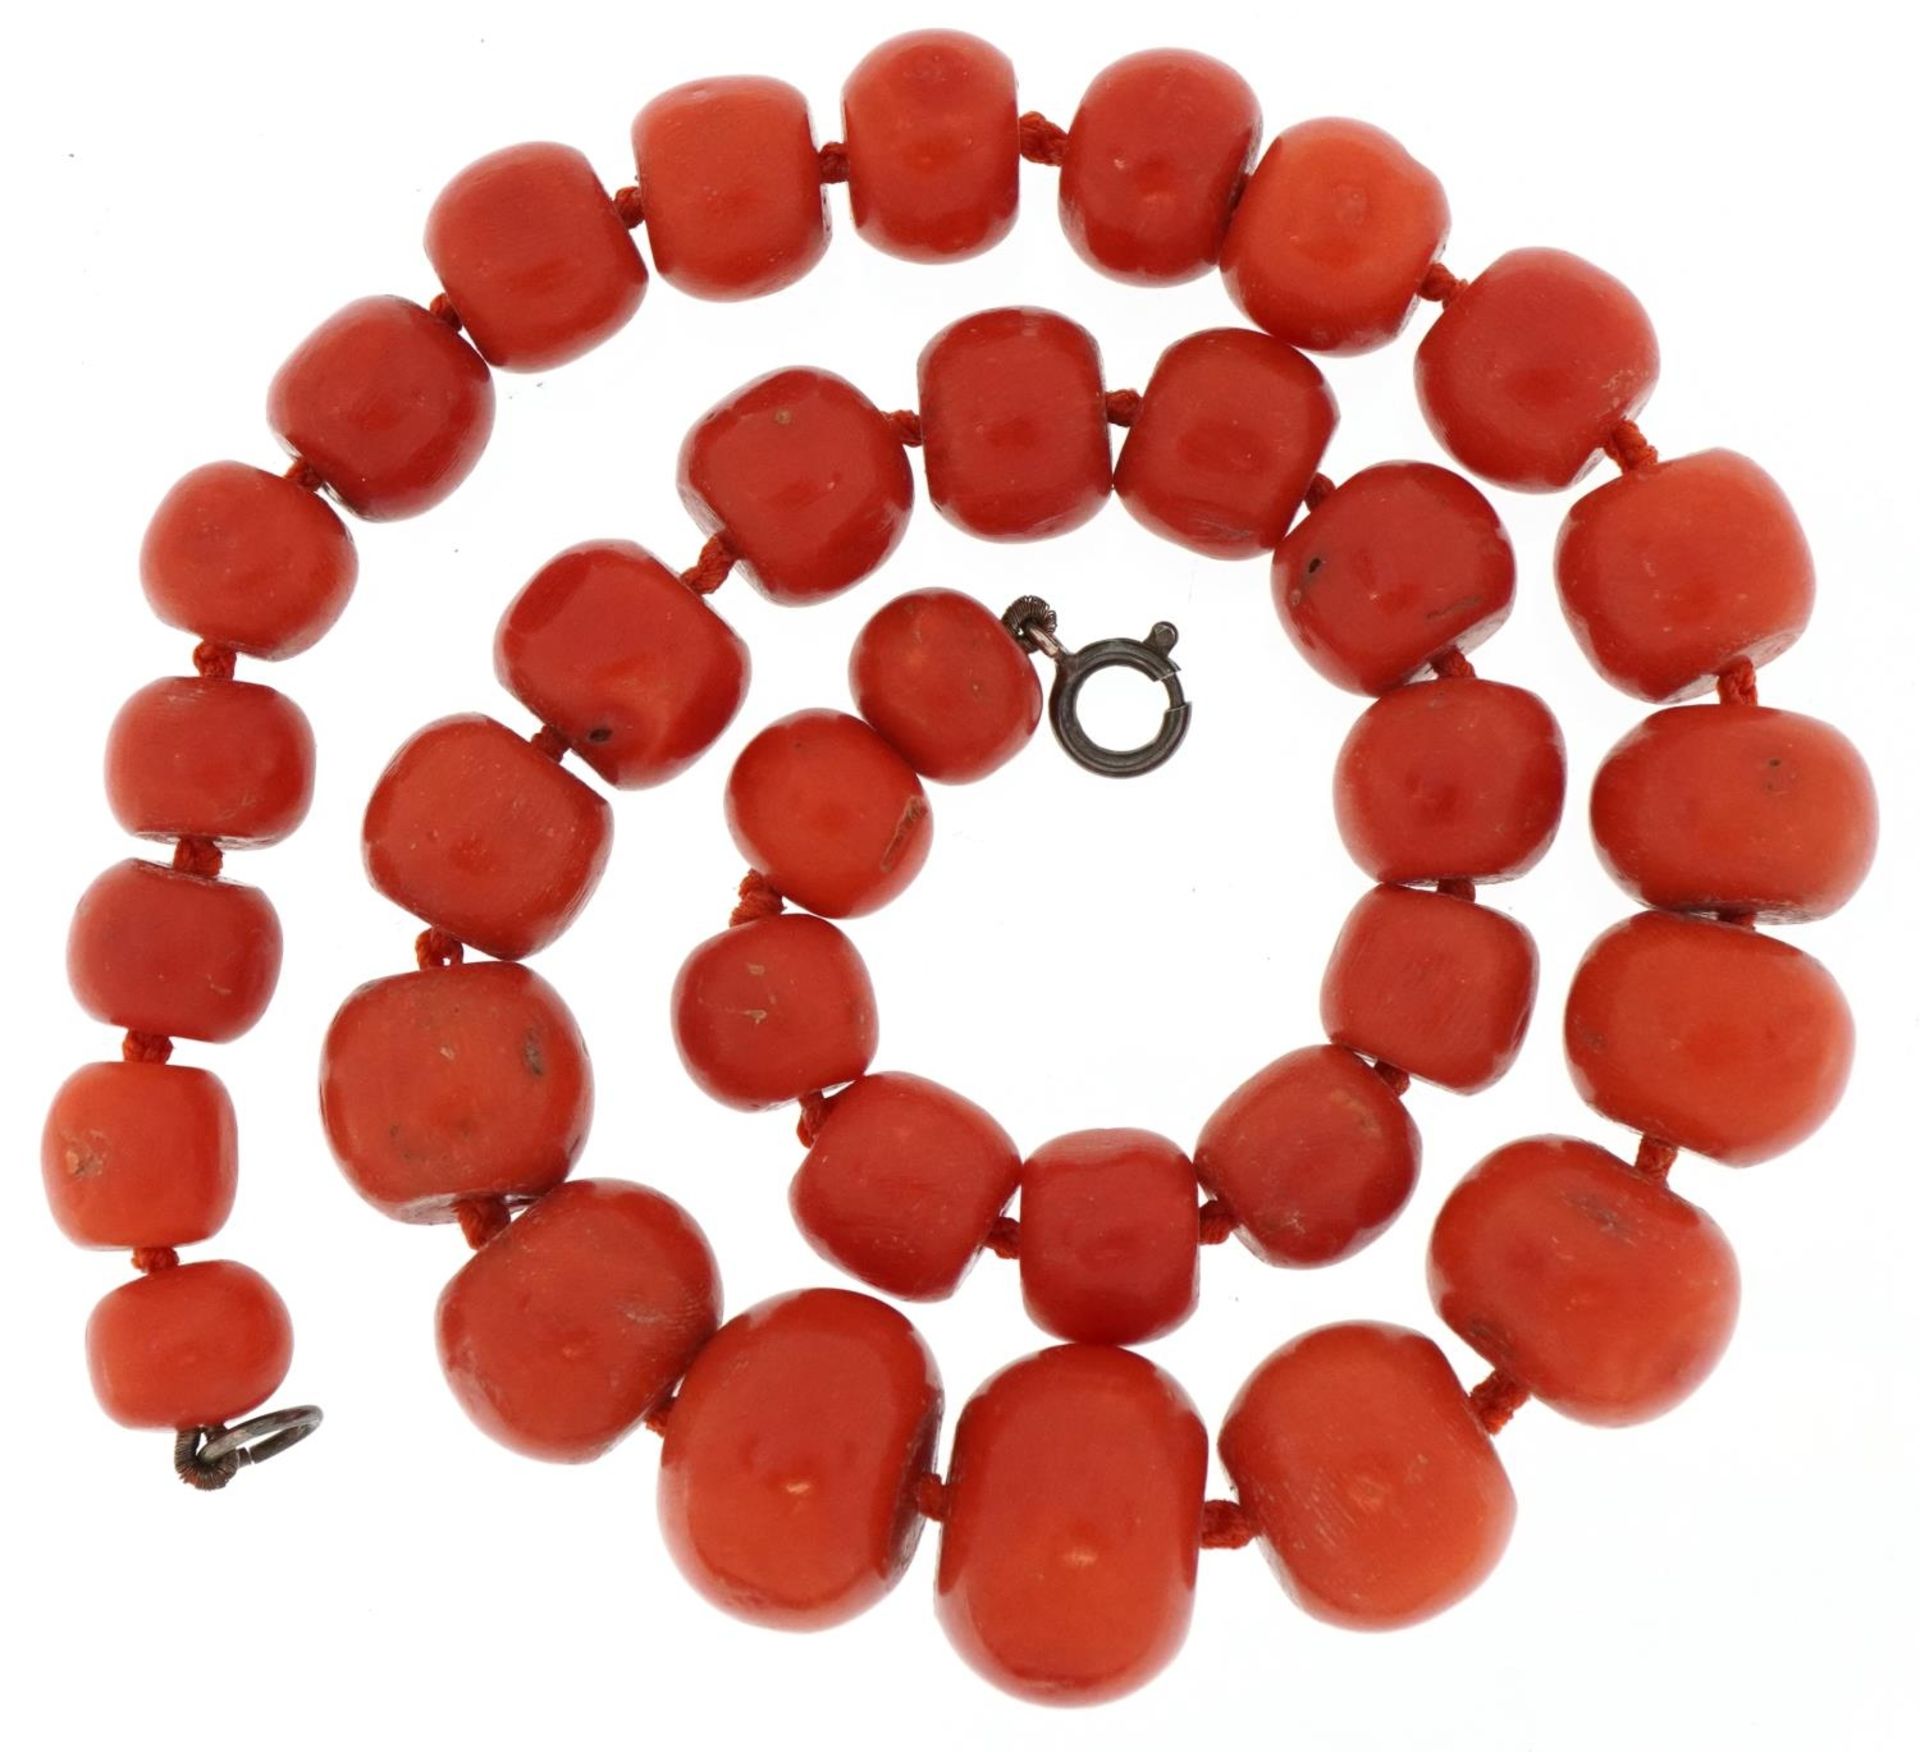 Graduated pink coral graduated bead necklace, 40cm in length, 77.5g - Image 2 of 2